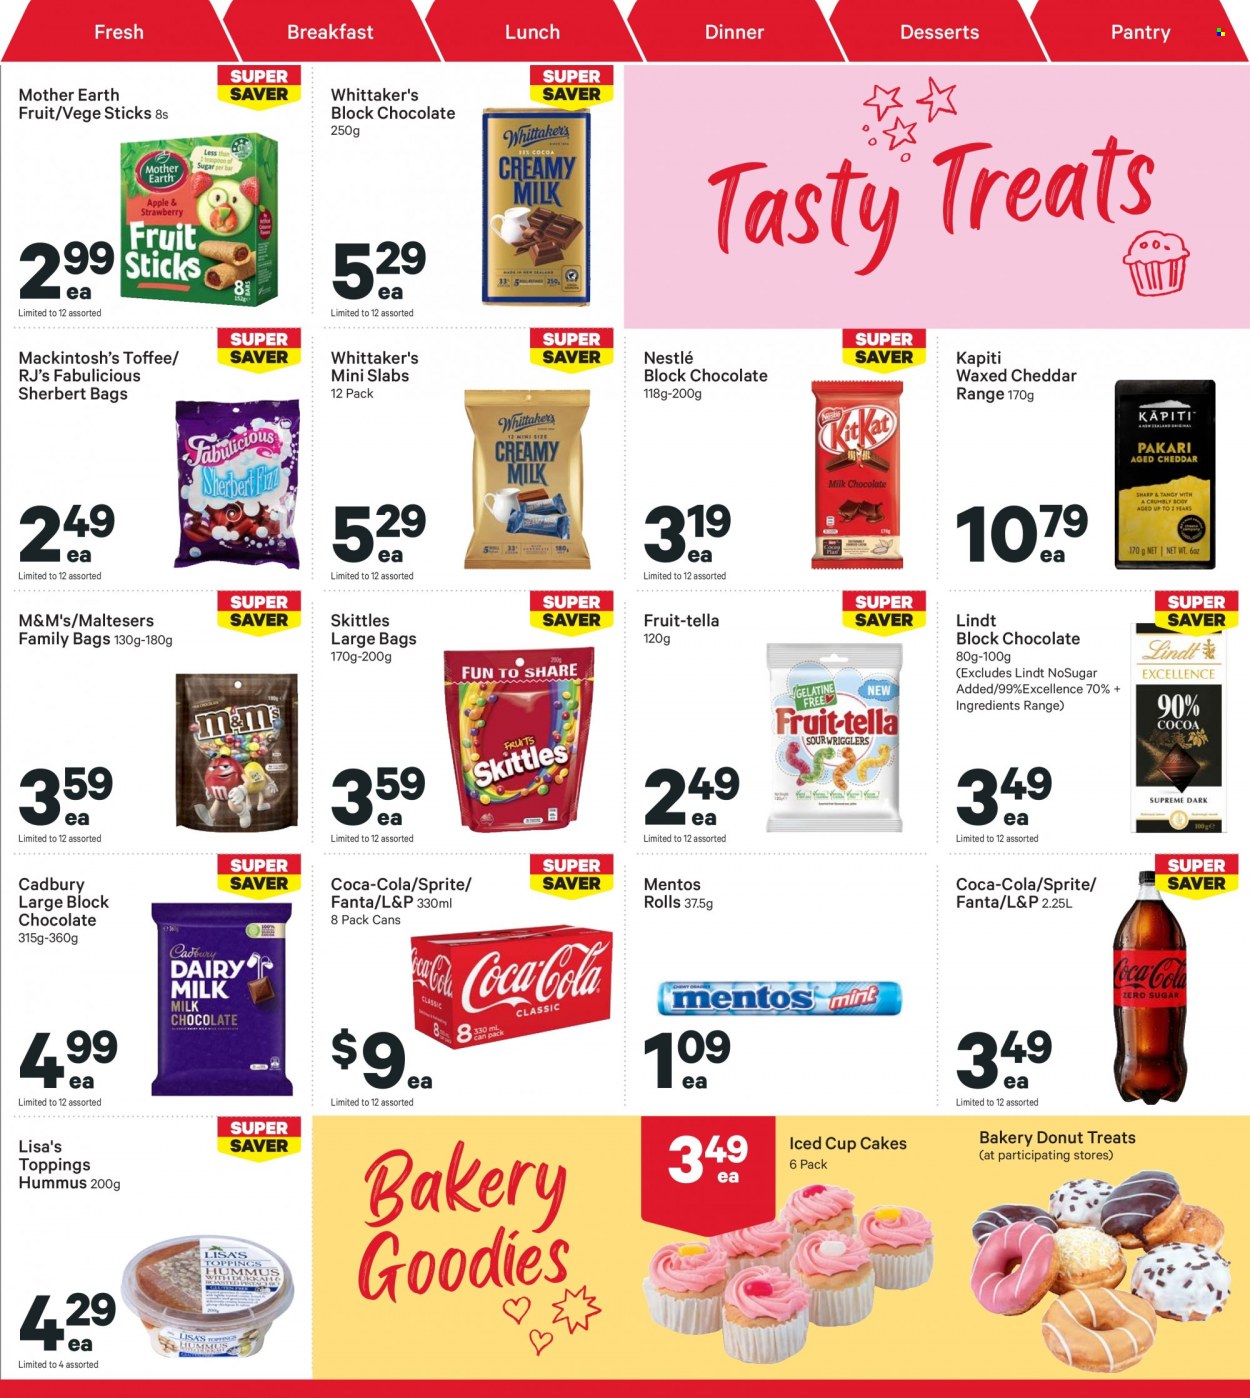 thumbnail - New World mailer - 21.11.2022 - 27.11.2022 - Sales products - donut, hummus, cheddar, cheese, Nestlé, chocolate, Lindt, Mentos, toffee, M&M's, Maltesers, Cadbury, Mother Earth, Whittaker's, Skittles, Coca-Cola, Sprite, Fanta, L&P. Page 23.